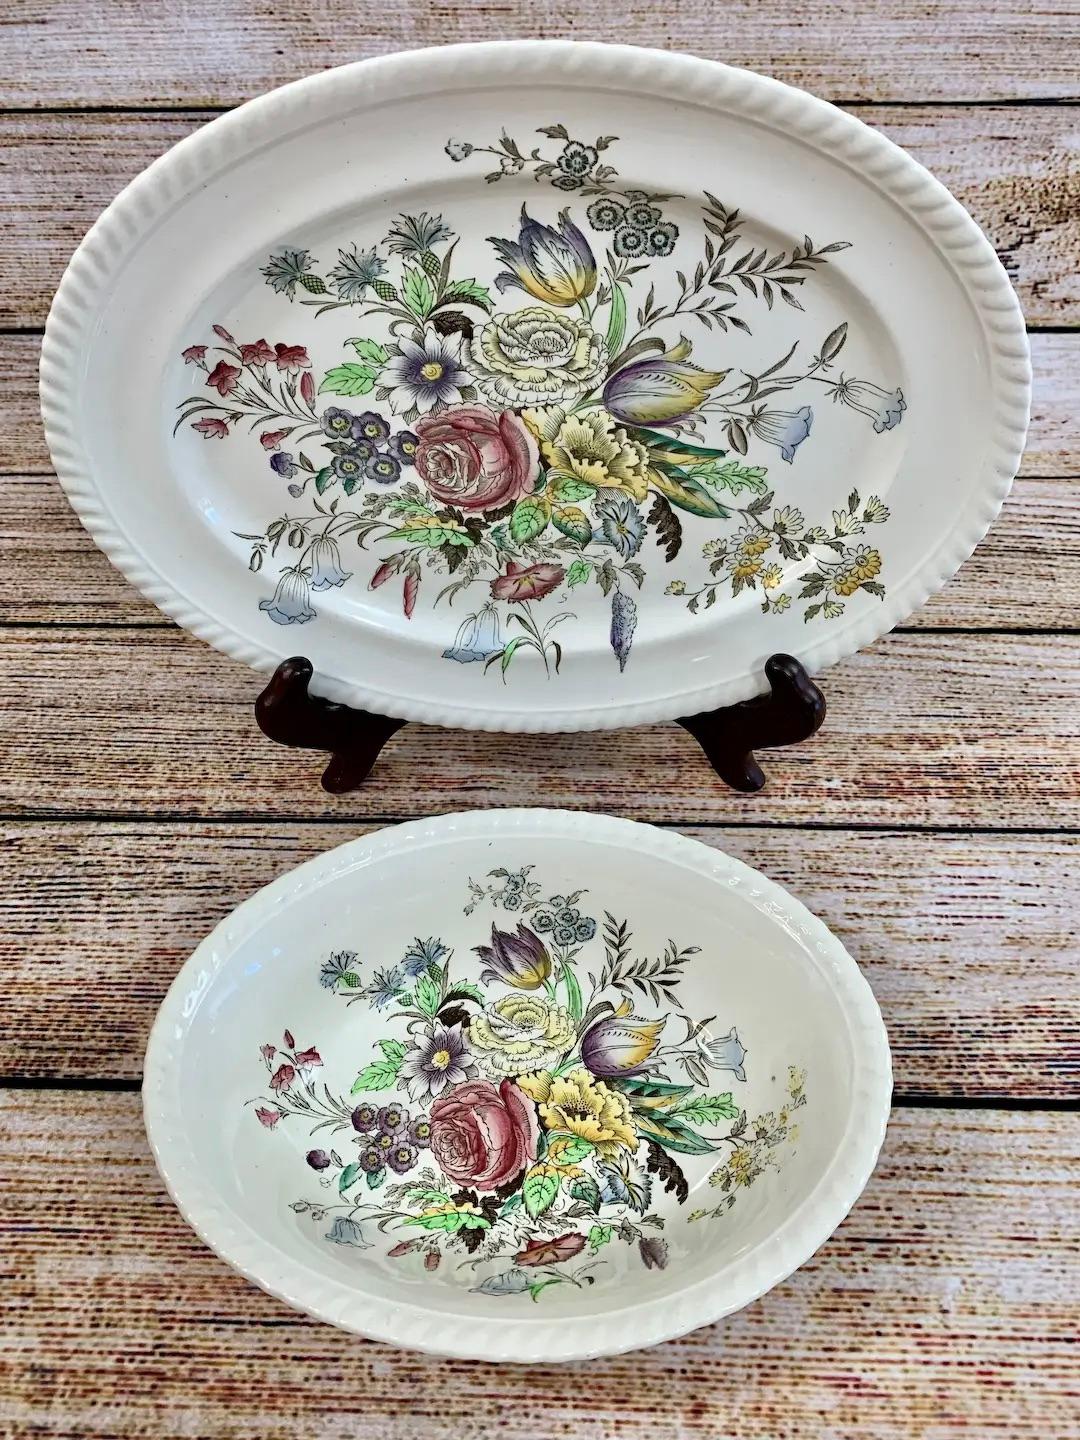 Johnson Bros WindsorWare in the highly sought after “Garden Bouquet” transferware pattern. Manufactured in England circa 1940-1970. 

This beautiful two-piece matching set includes both the 12 inch oval platter and 9 inch vegetable bowl.